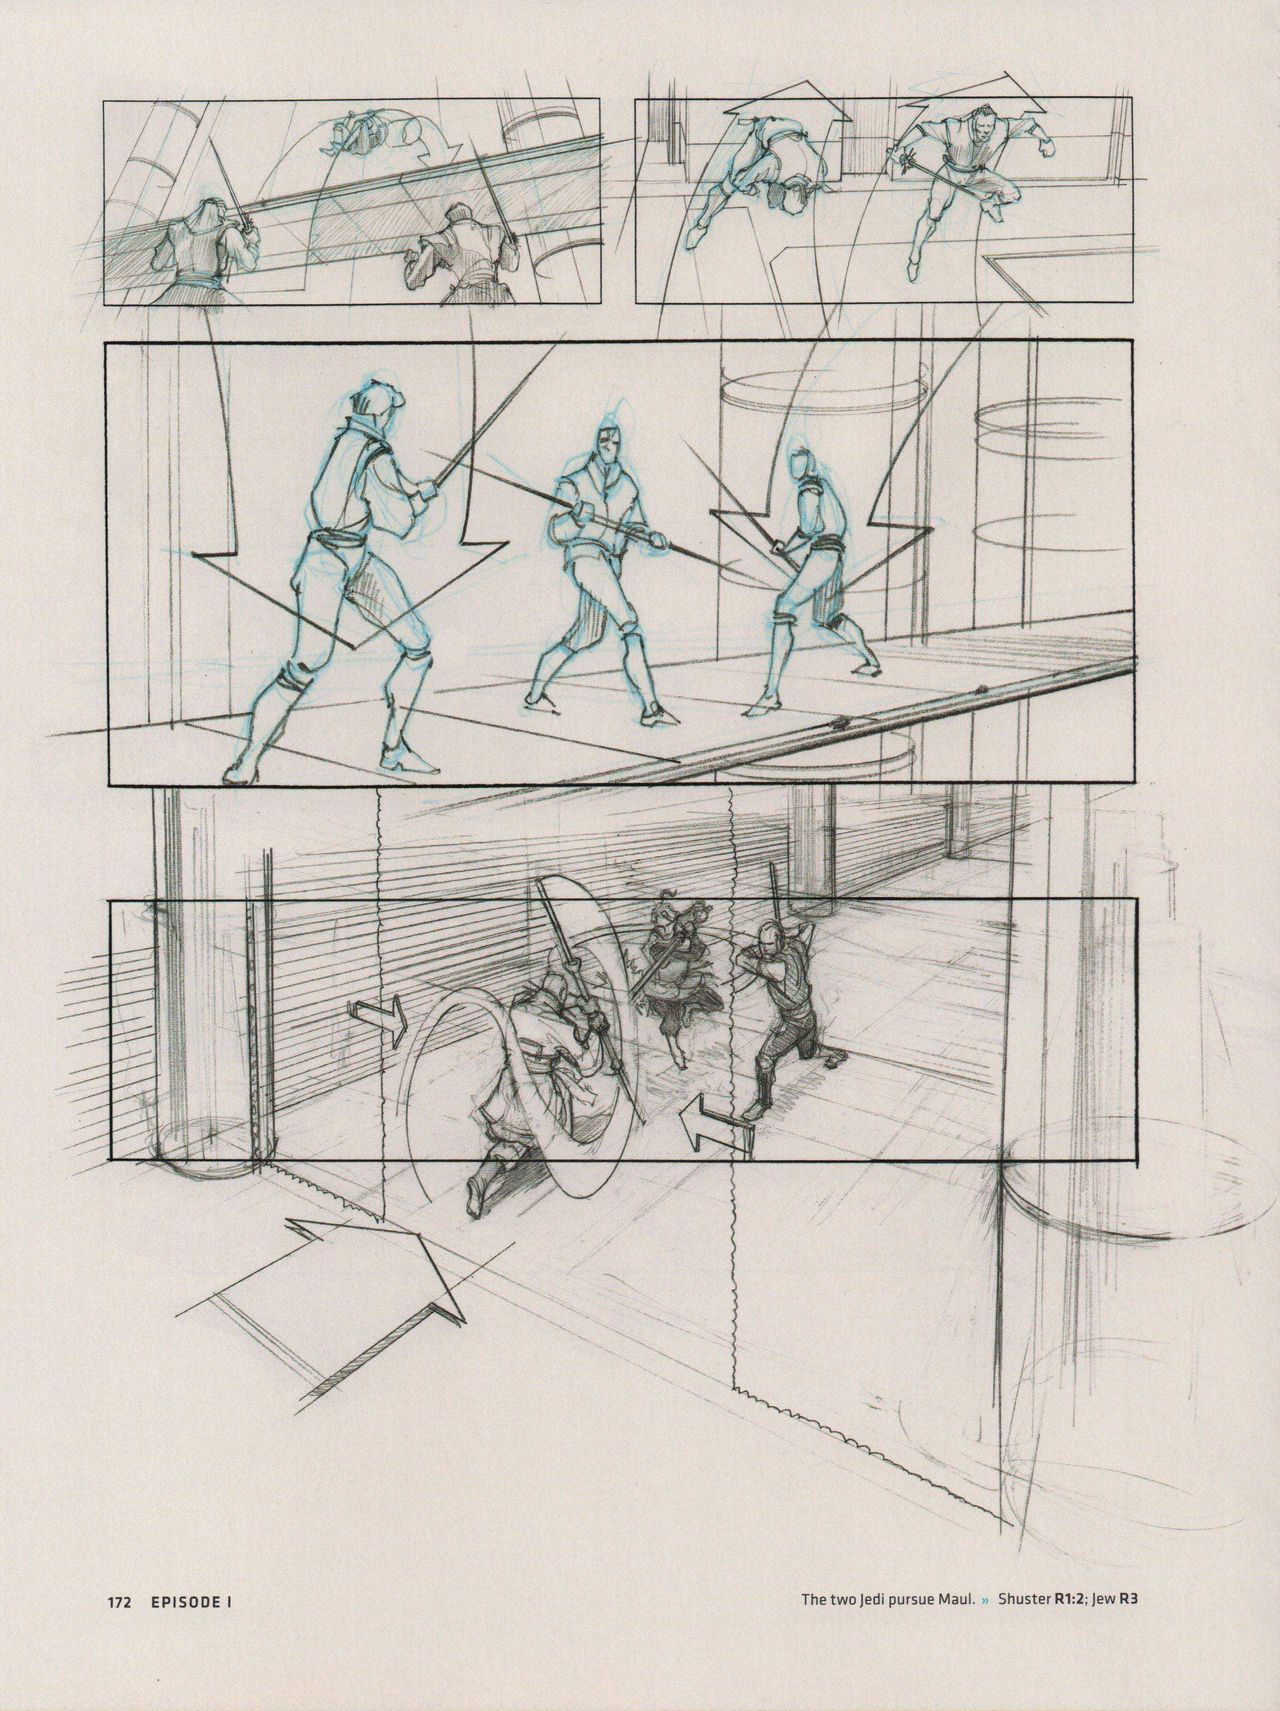 Star Wars Storyboards - The Prequel Trilogy 176